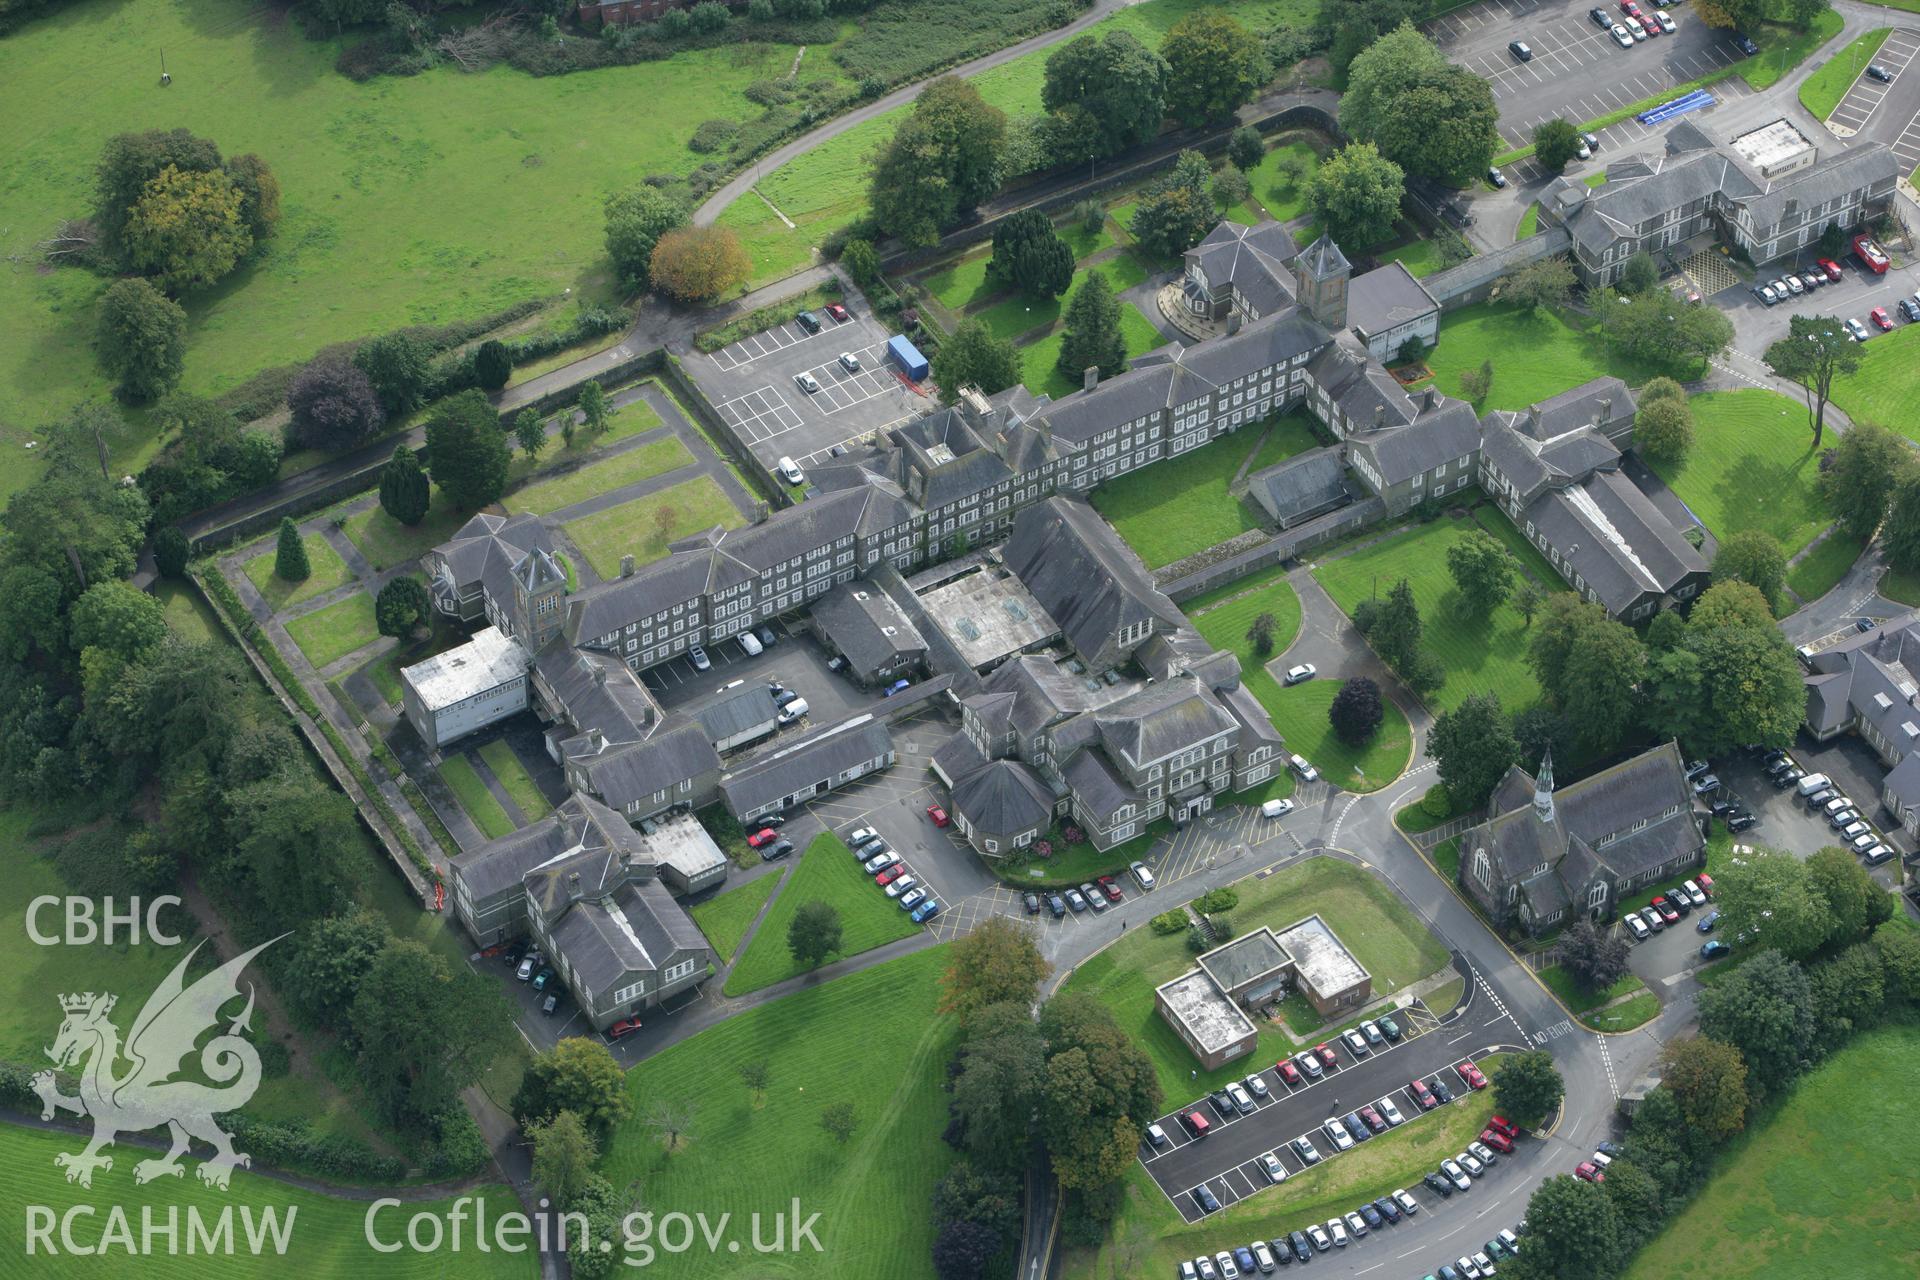 RCAHMW colour oblique photograph of St David's Hospital, Carmarthen. Taken by Toby Driver on 12/09/2008.